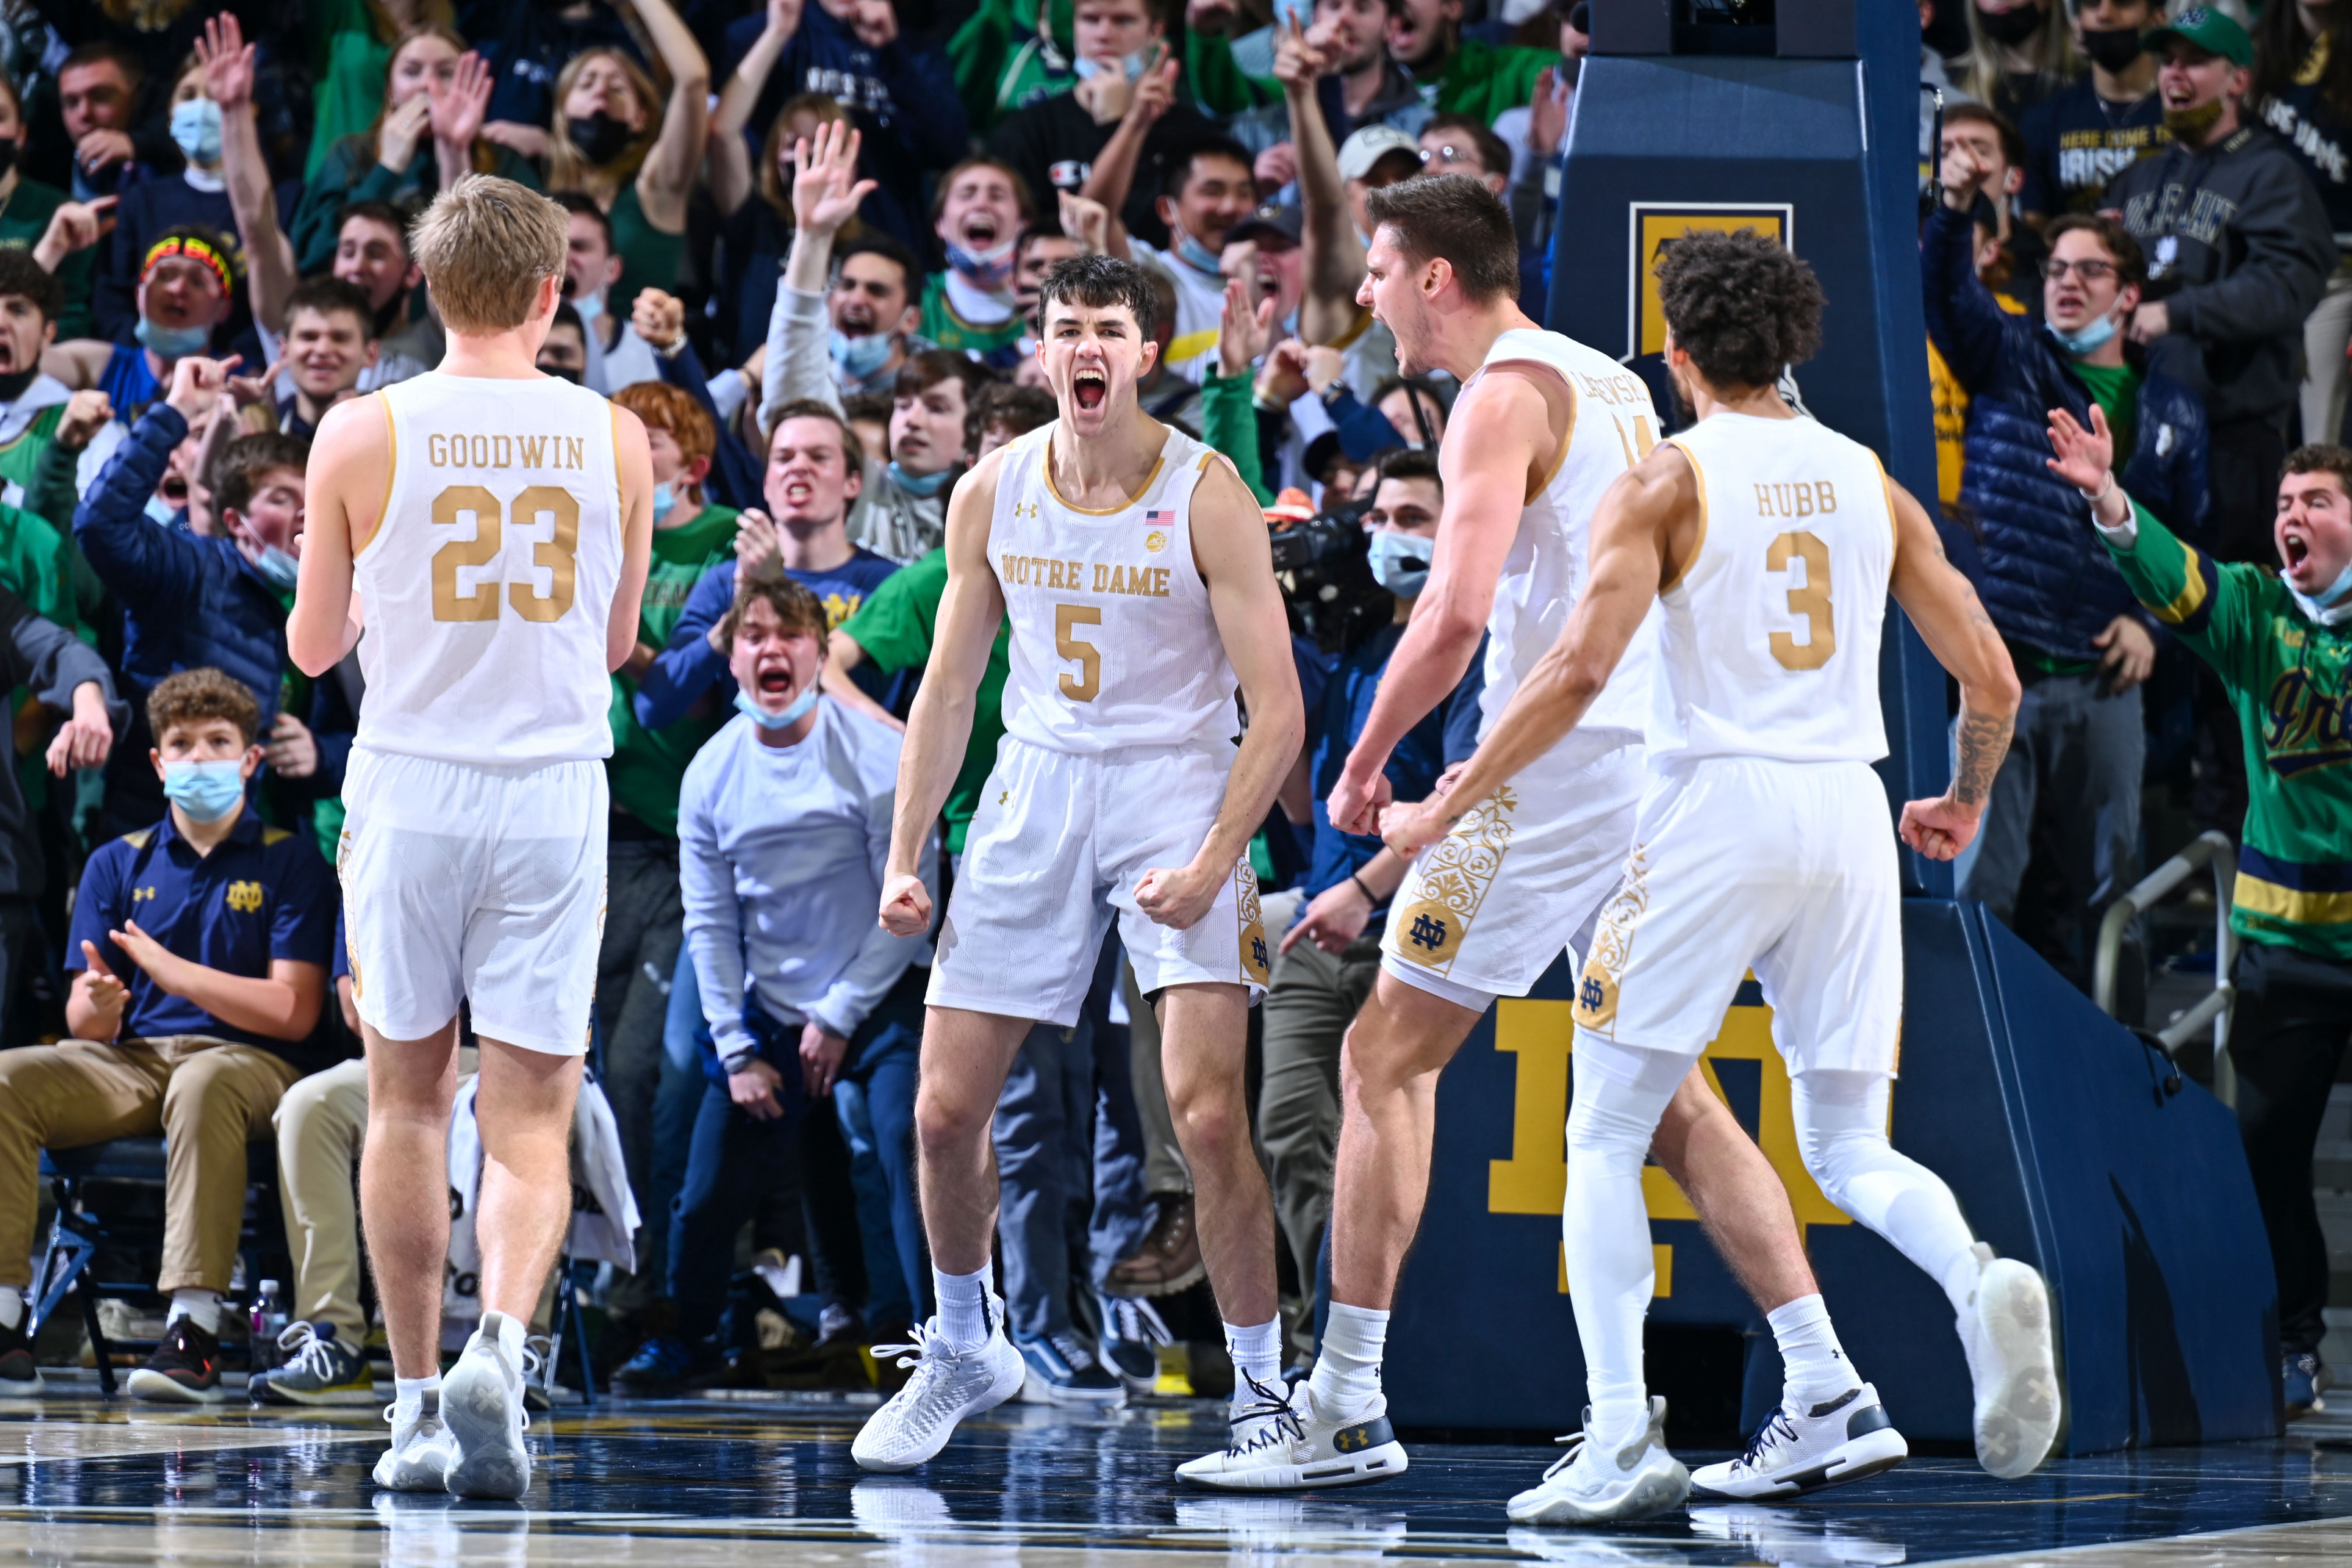 Notre Dame basketball Game Tonight Irish vs Texas Tech Line, Predictions, Odds, TV Channel and Live Stream for Basketball Game Mar